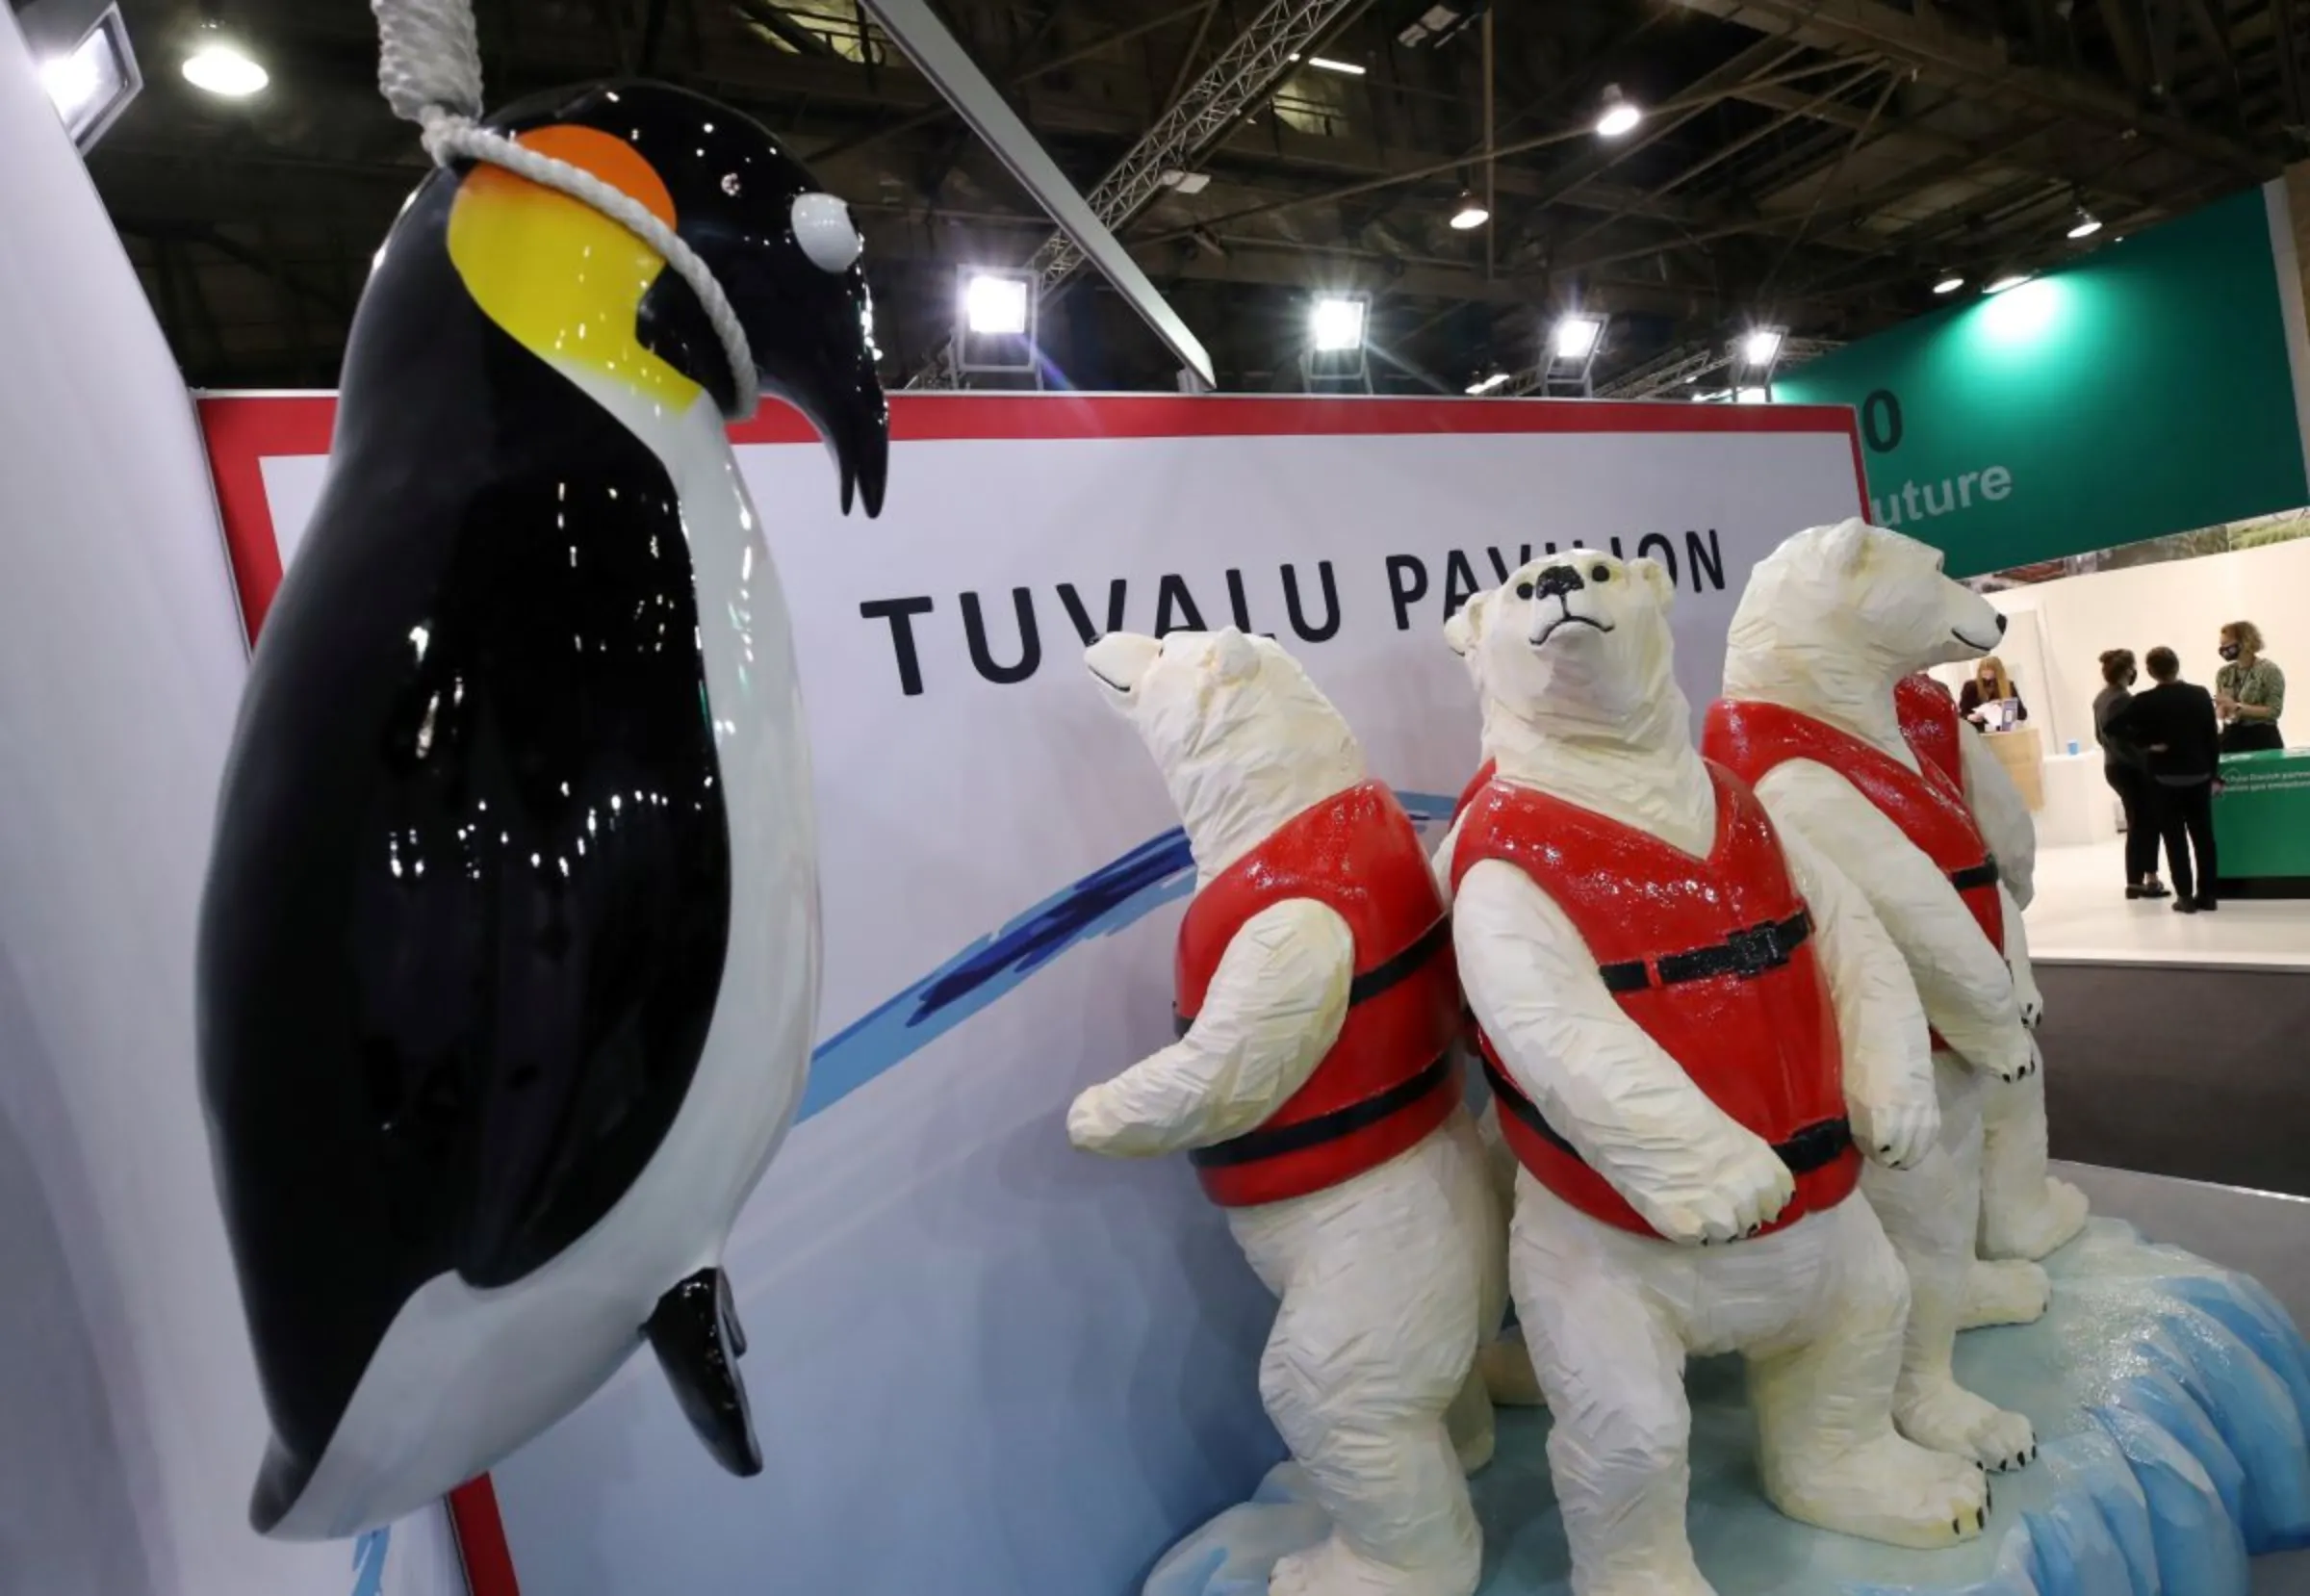 People stand next to the Tuvalu pavilion during the UN Climate Change Conference (COP26) in Glasgow, Scotland, Britain, November 1, 2021. REUTERS/Yves Herman